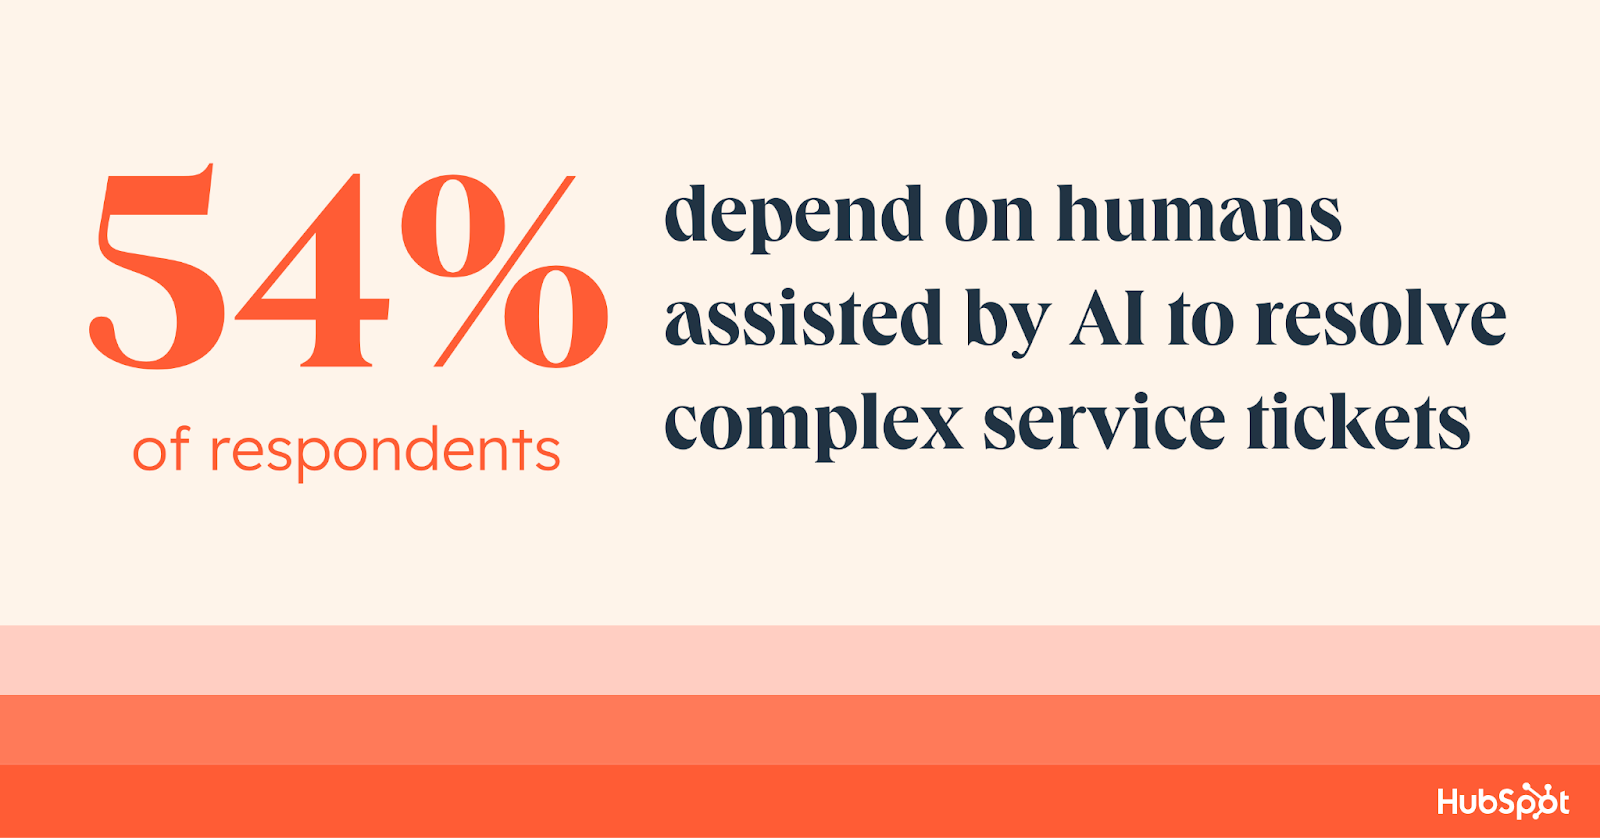 graphic showing statistic around AI use for complex customer service